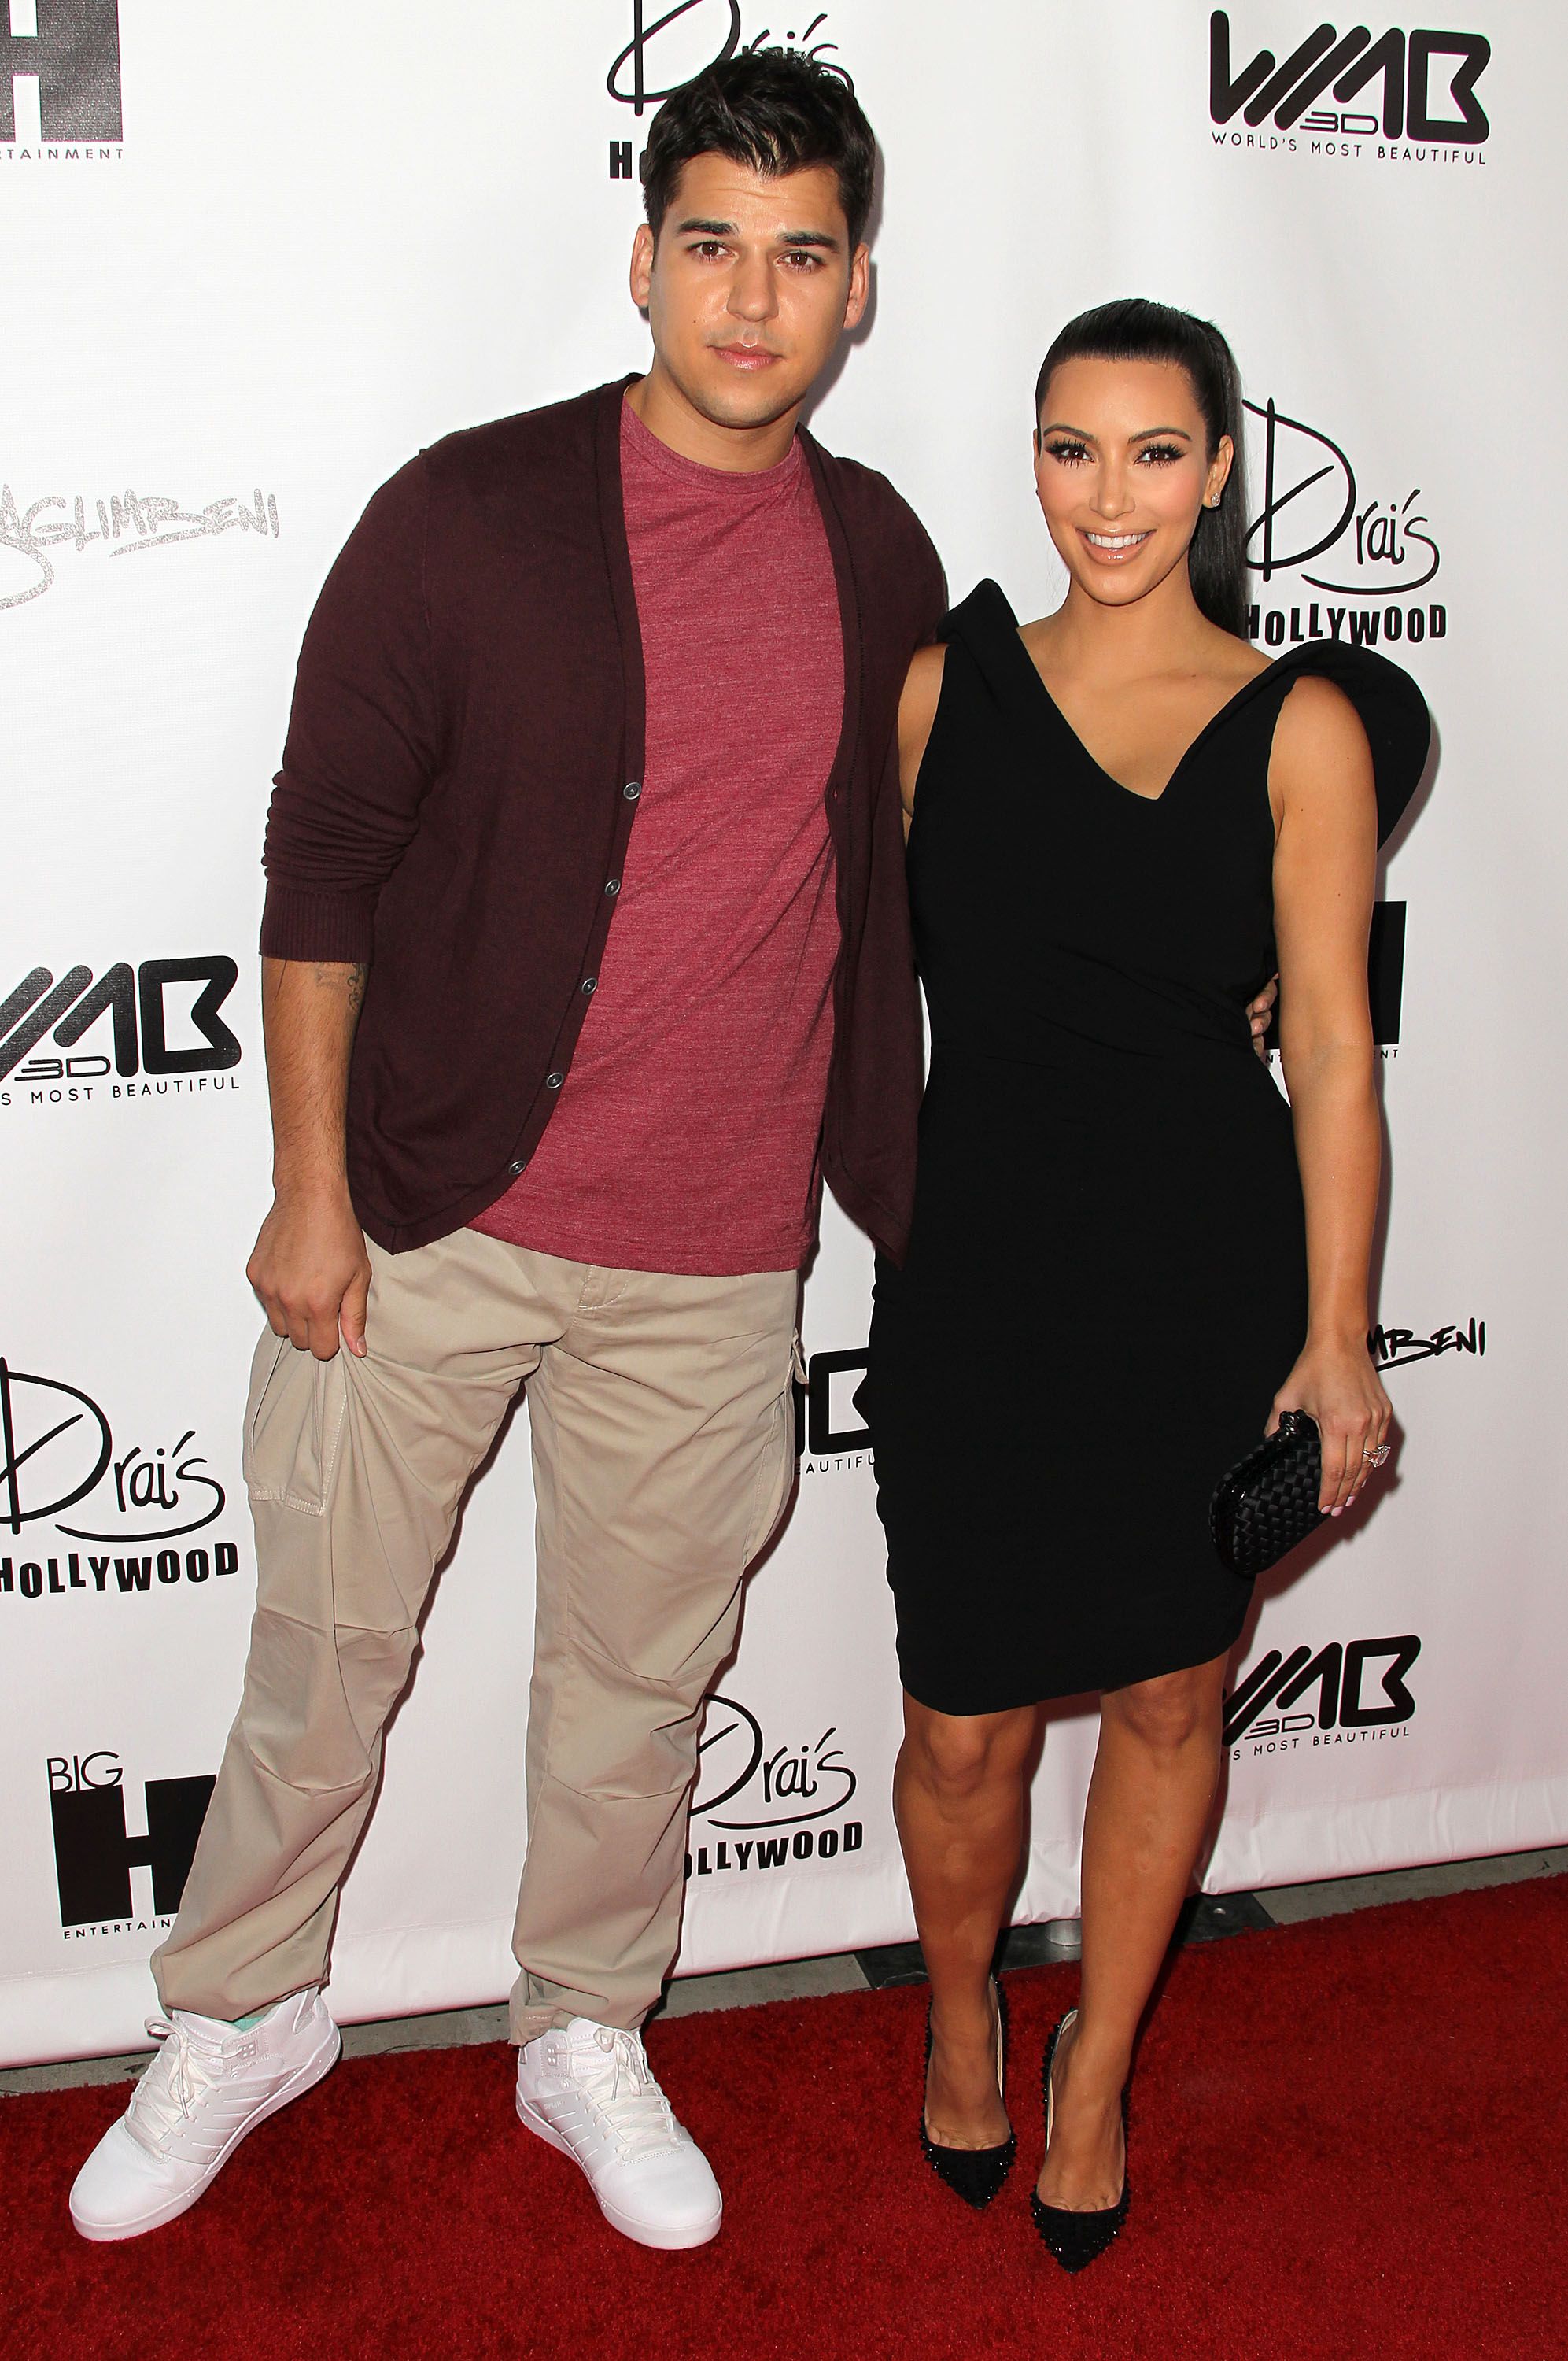 Rob Kardashian and Kim Kardashian during the "World's Most Beautiful Magazine" launch event at Drai's Hollywood on August 10, 2011 in Hollywood, California. | Source: Getty Images